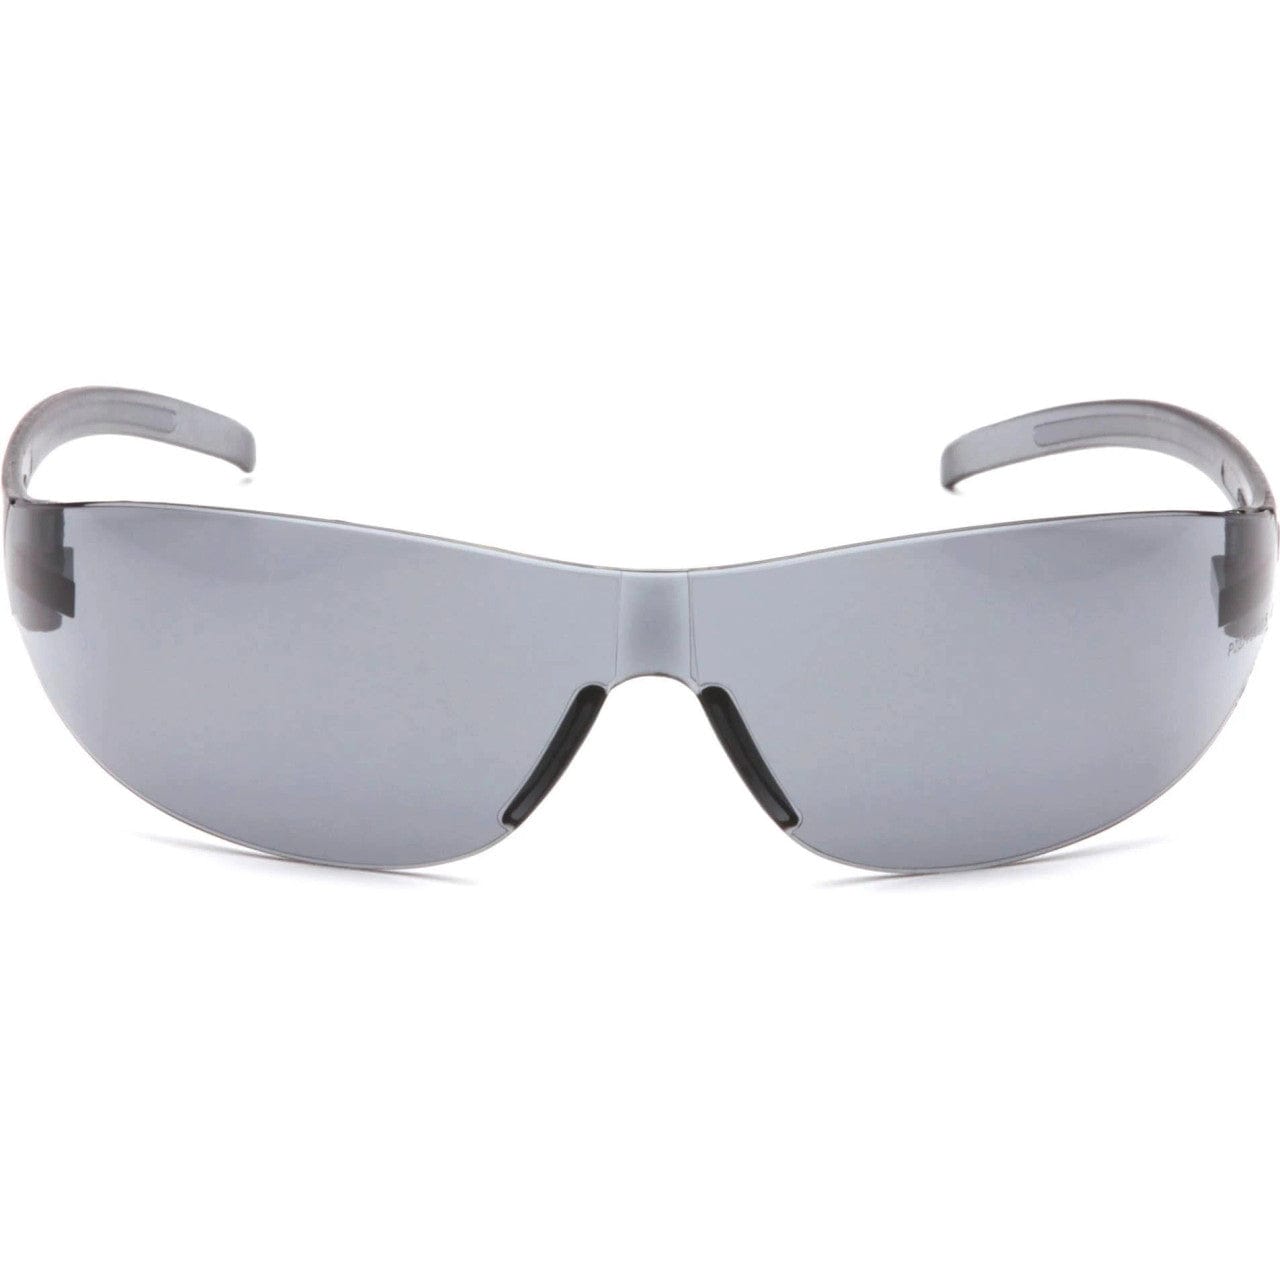 Pyramex Alair Safety Glasses with Gray Lens S3220S Front View